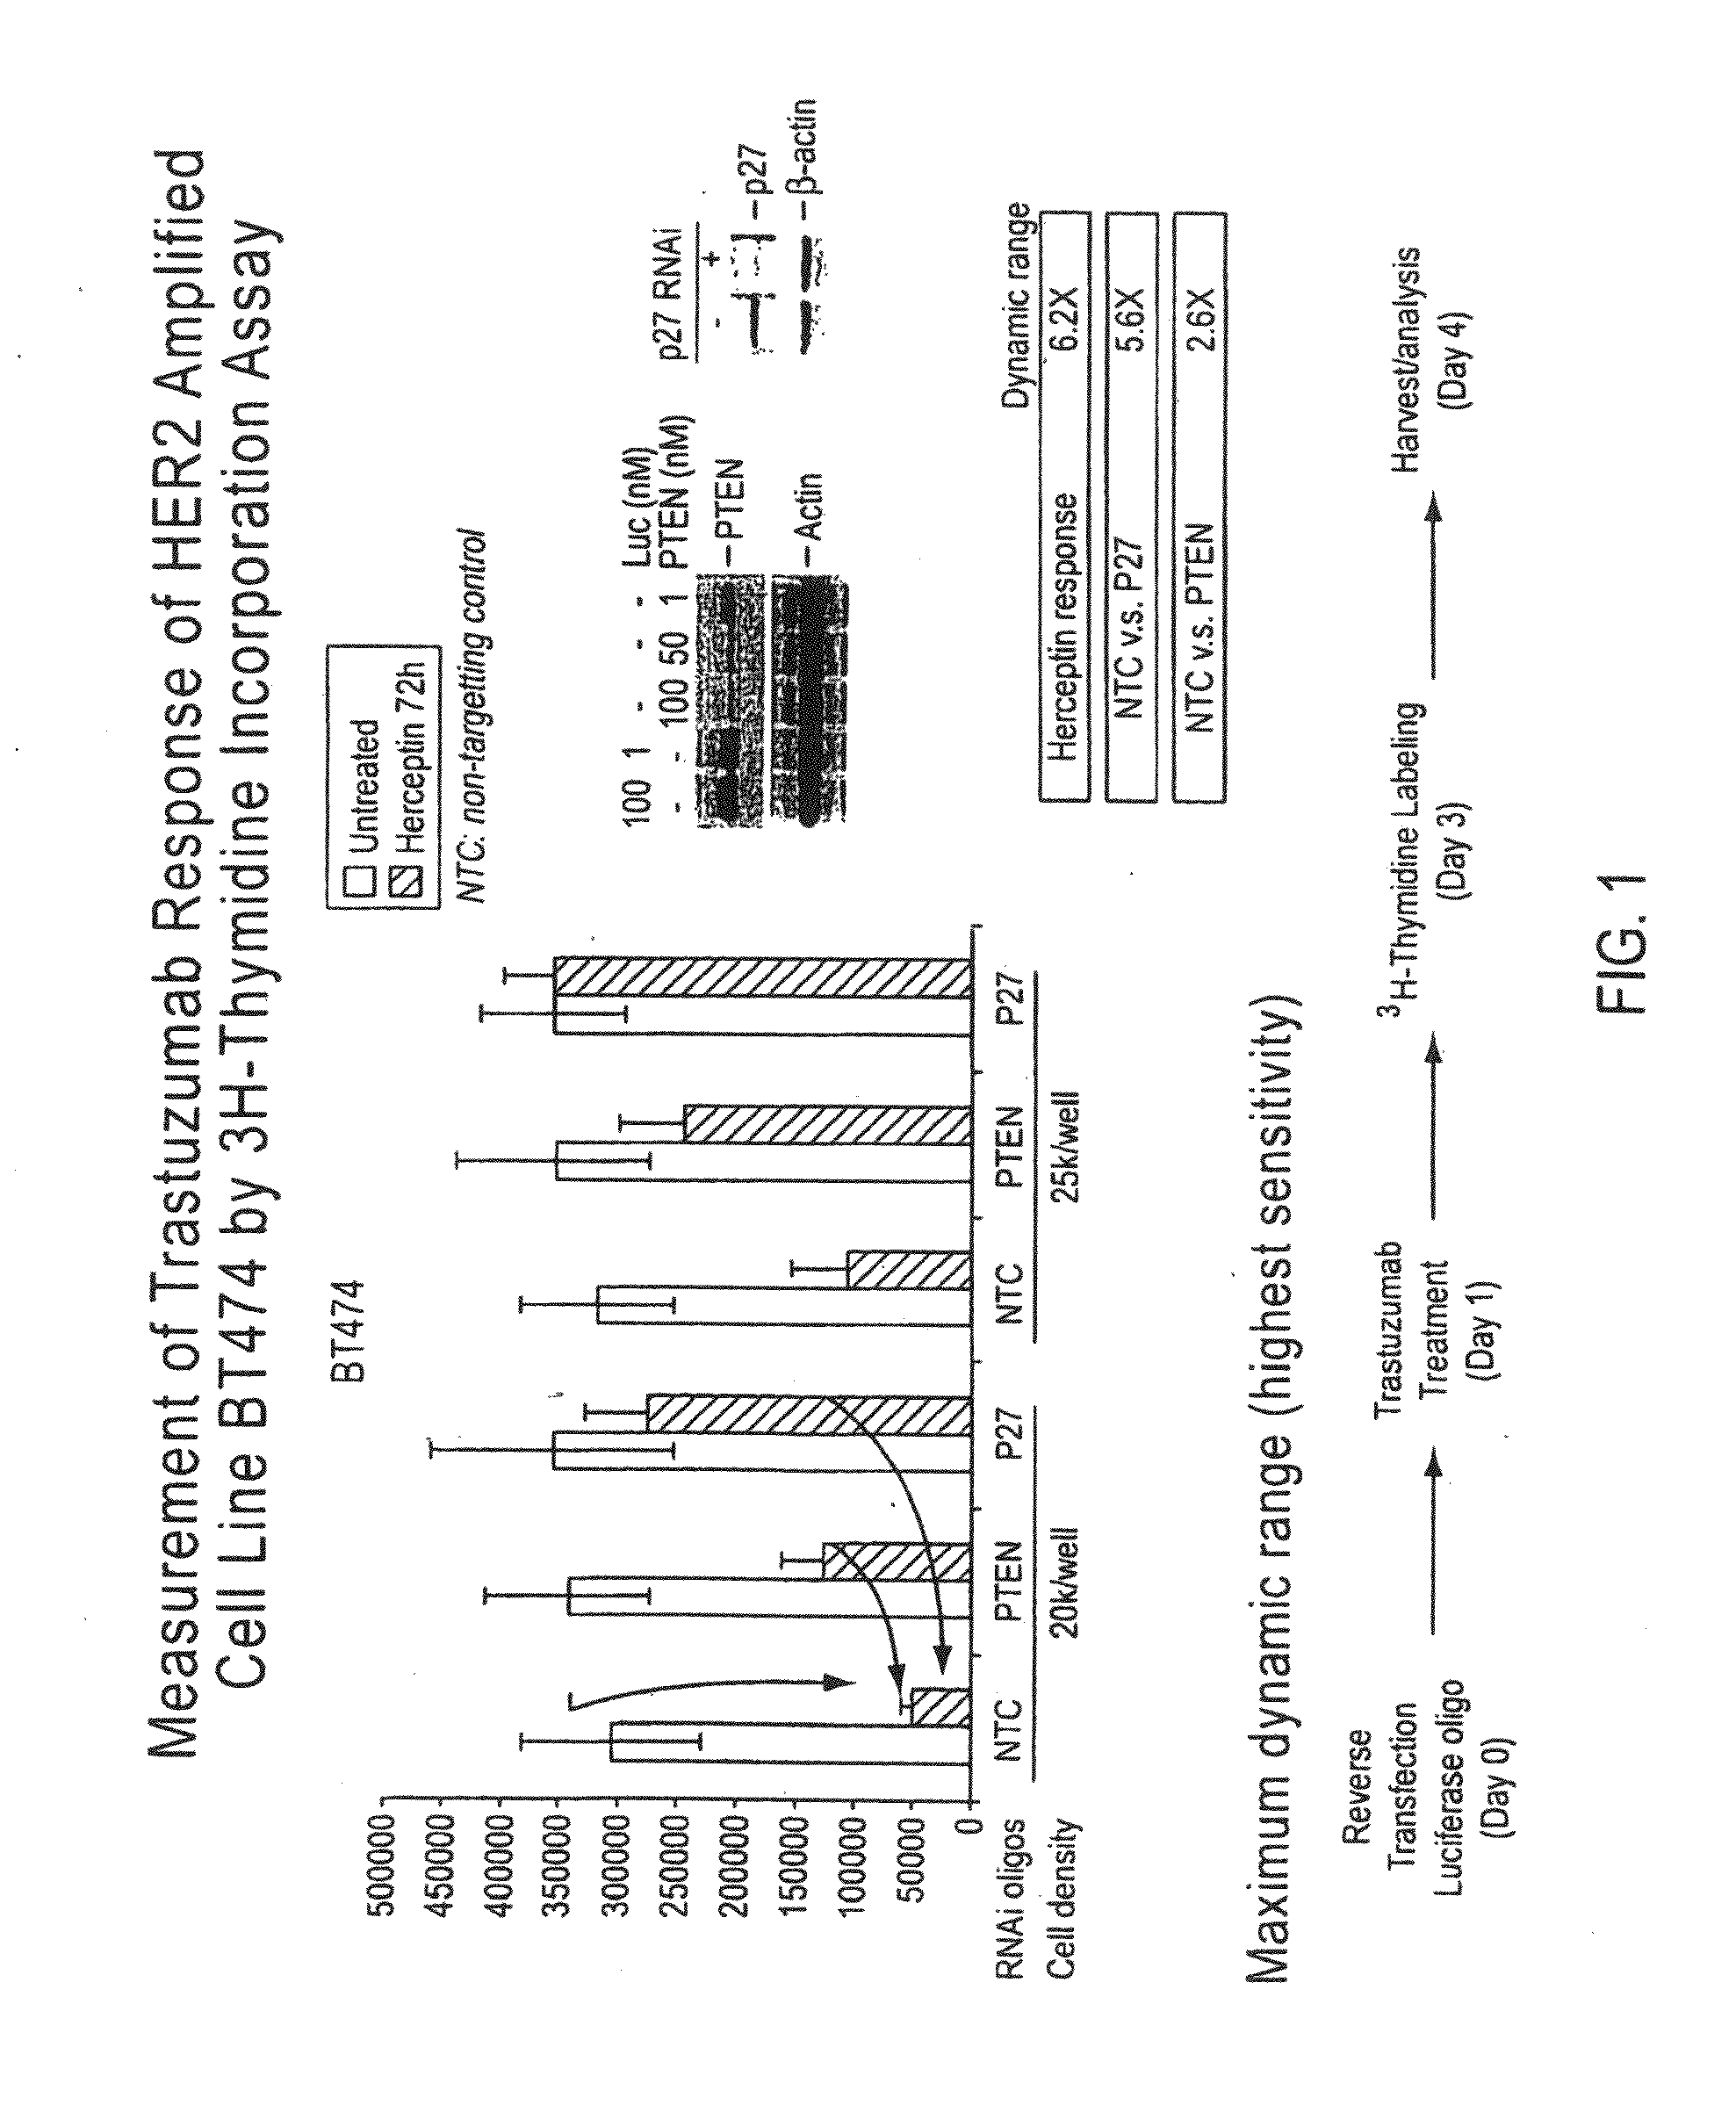 Gene expression markers of tumor resistance to HER2 inhibitor treatment